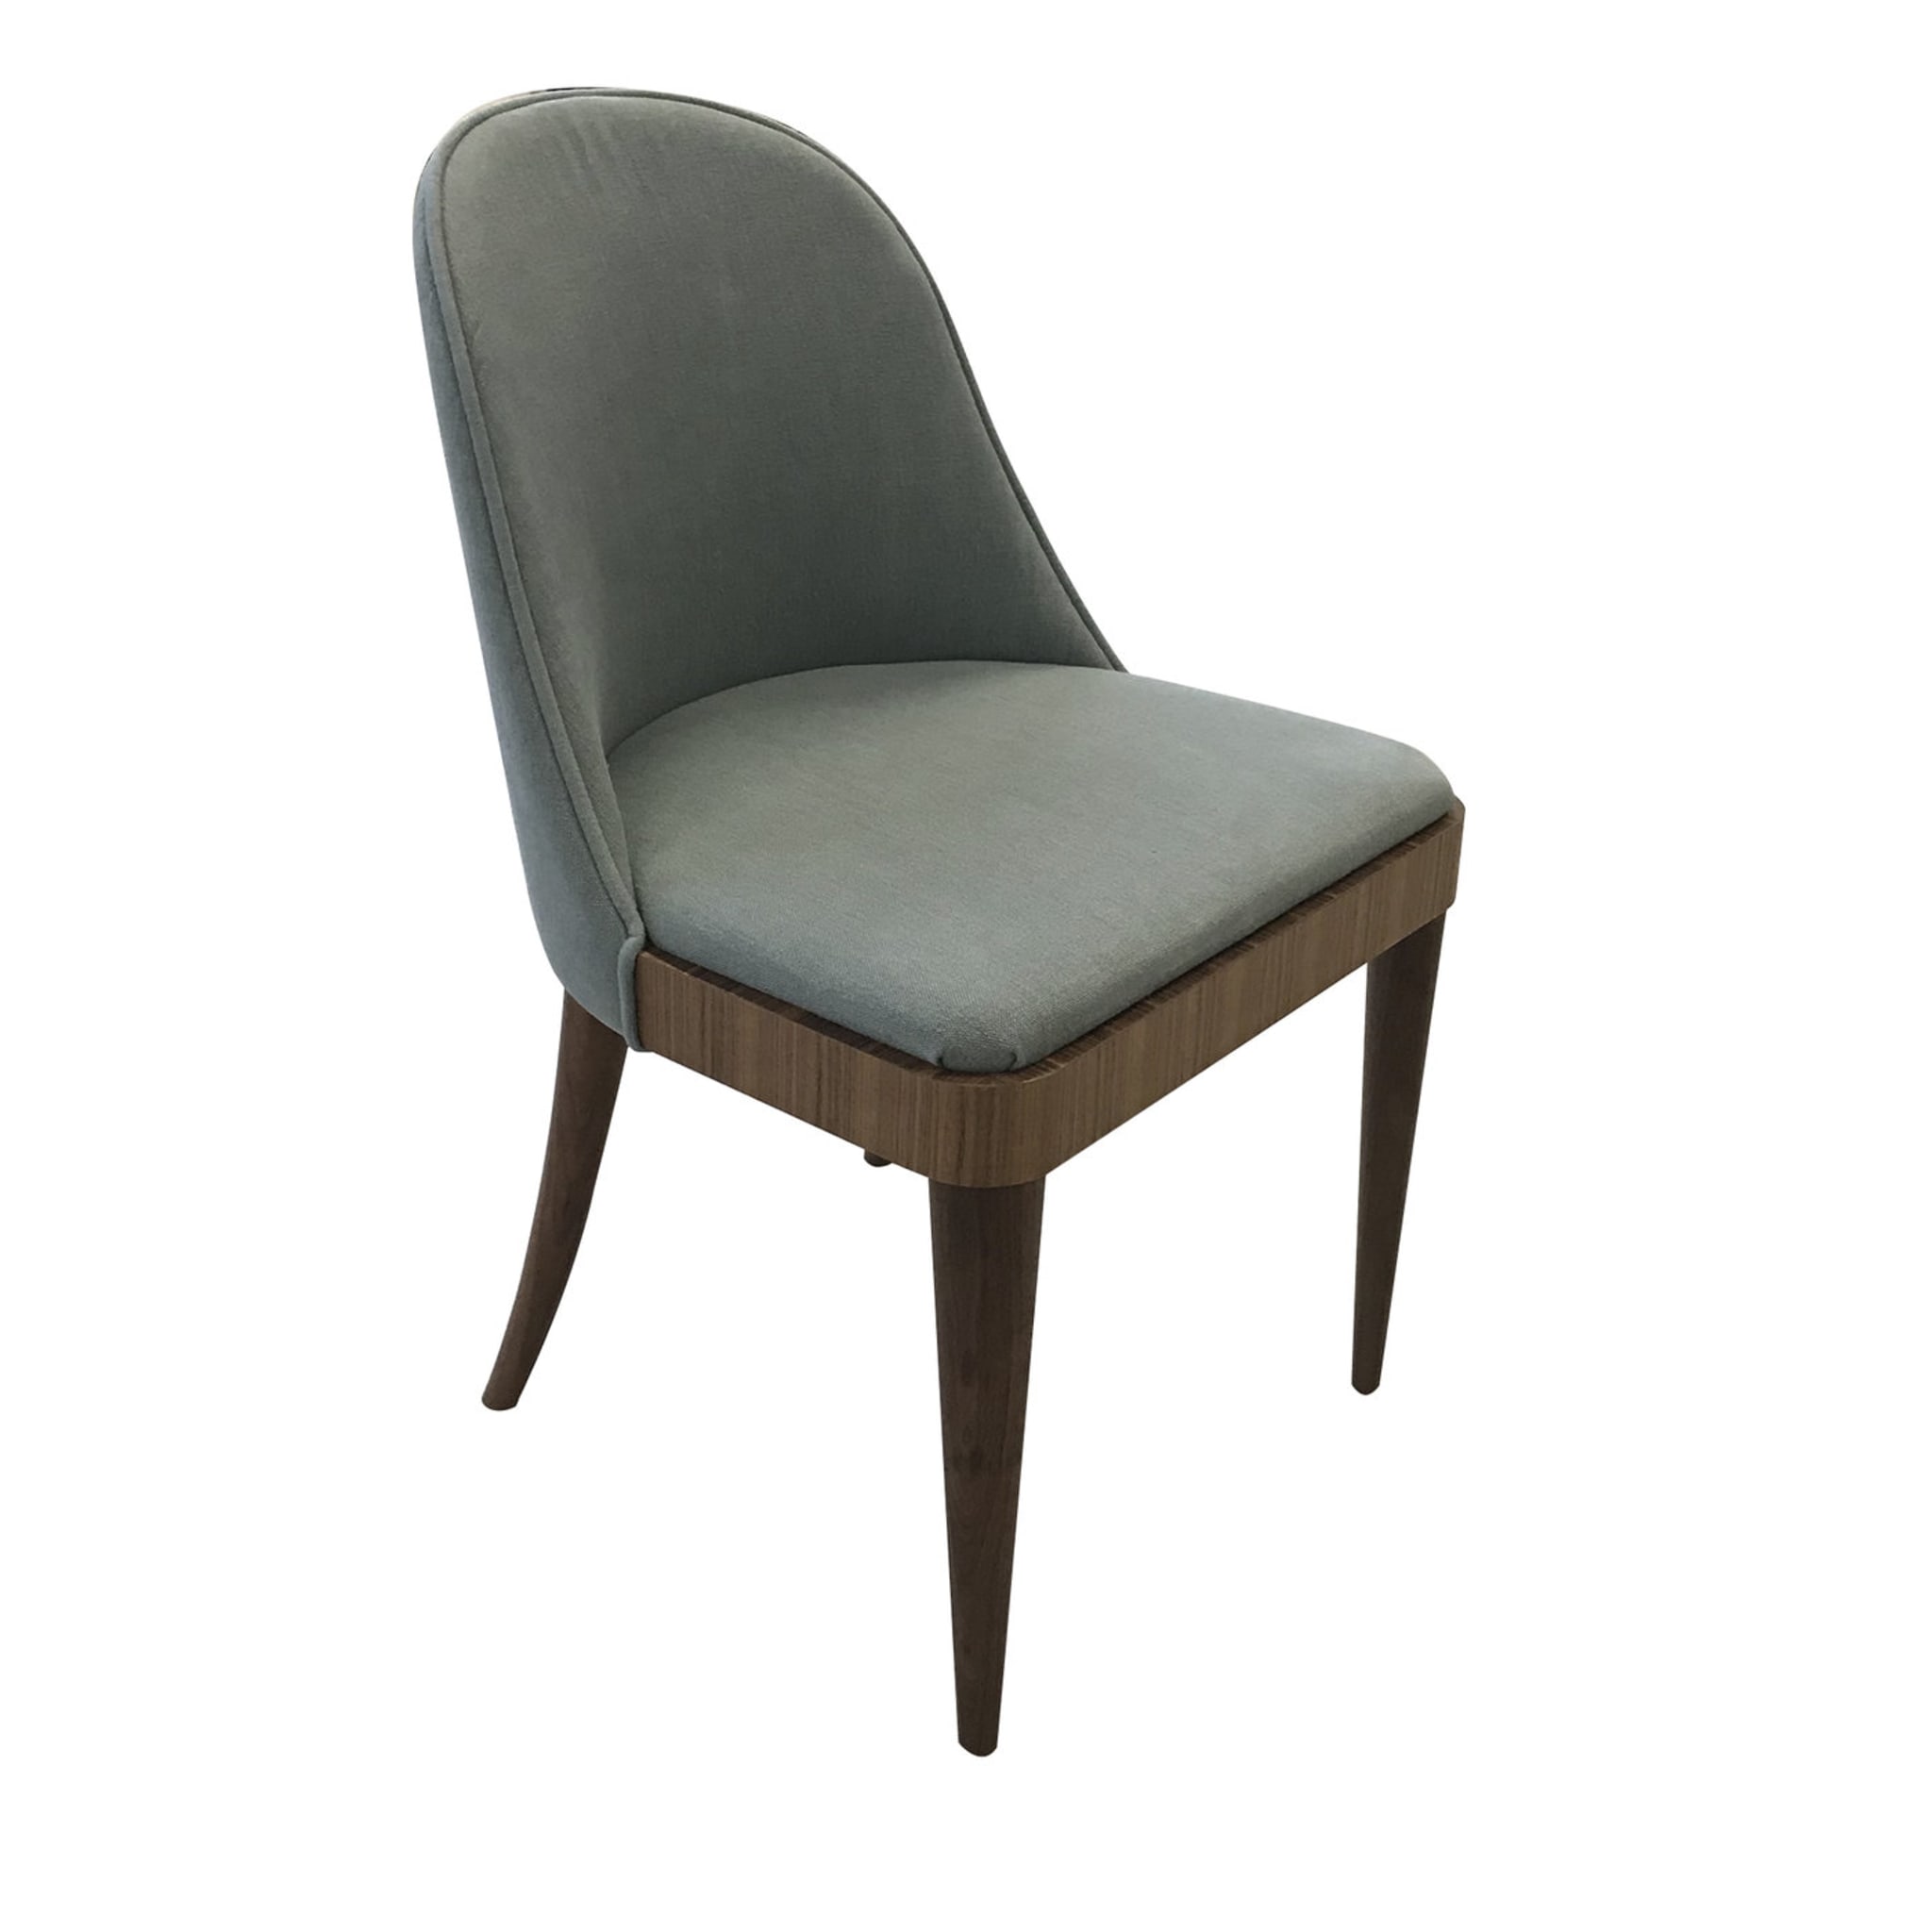 Cordiale chair - Main view